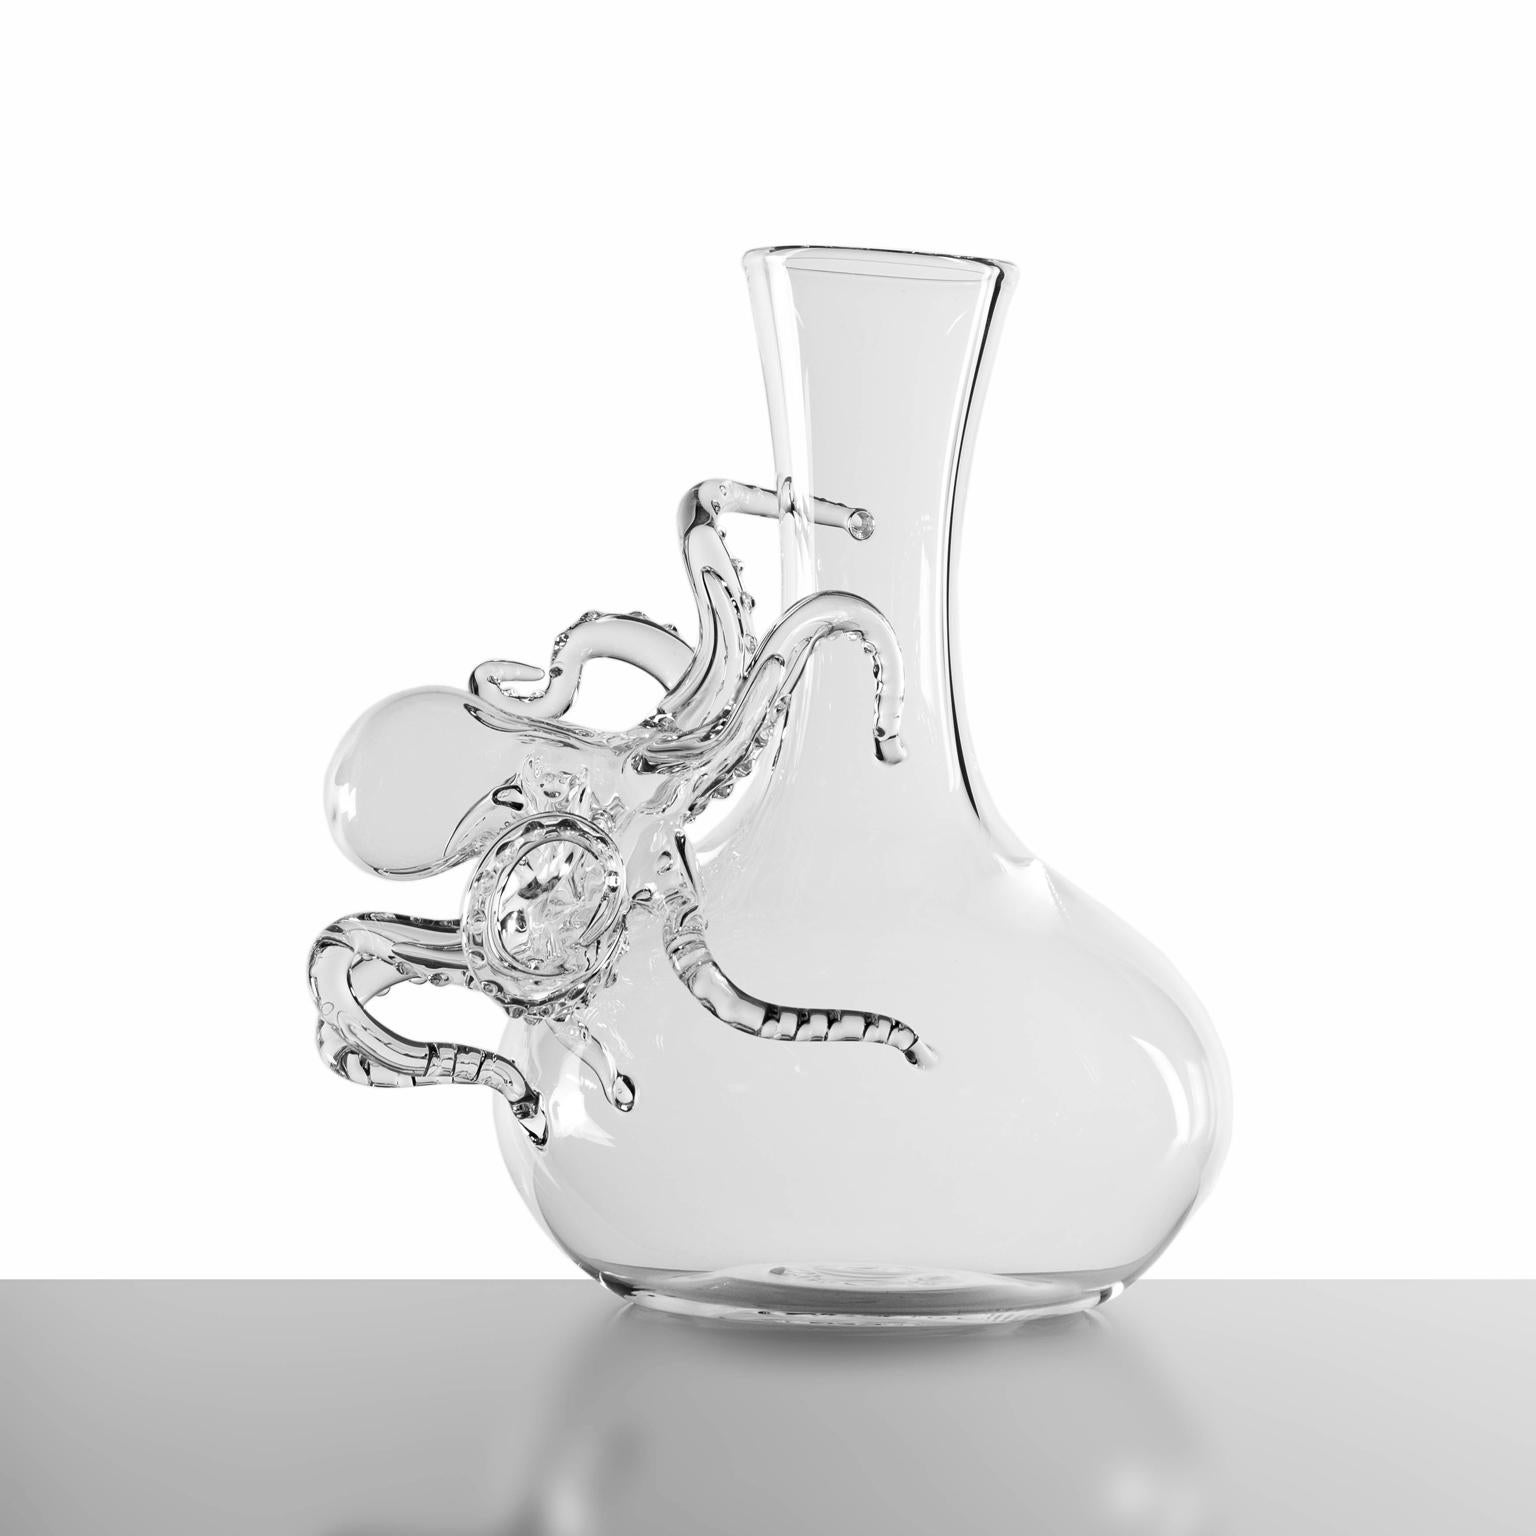 'Tentacle Decanter
A Hand Blown Glass Decanter by Simone Crestani
Tentacle Decanter is one of the pieces from the Polpo Collection.

The enveloping elegance of the Polpo Collection may make you believe that the animal is really wrapping the decanter